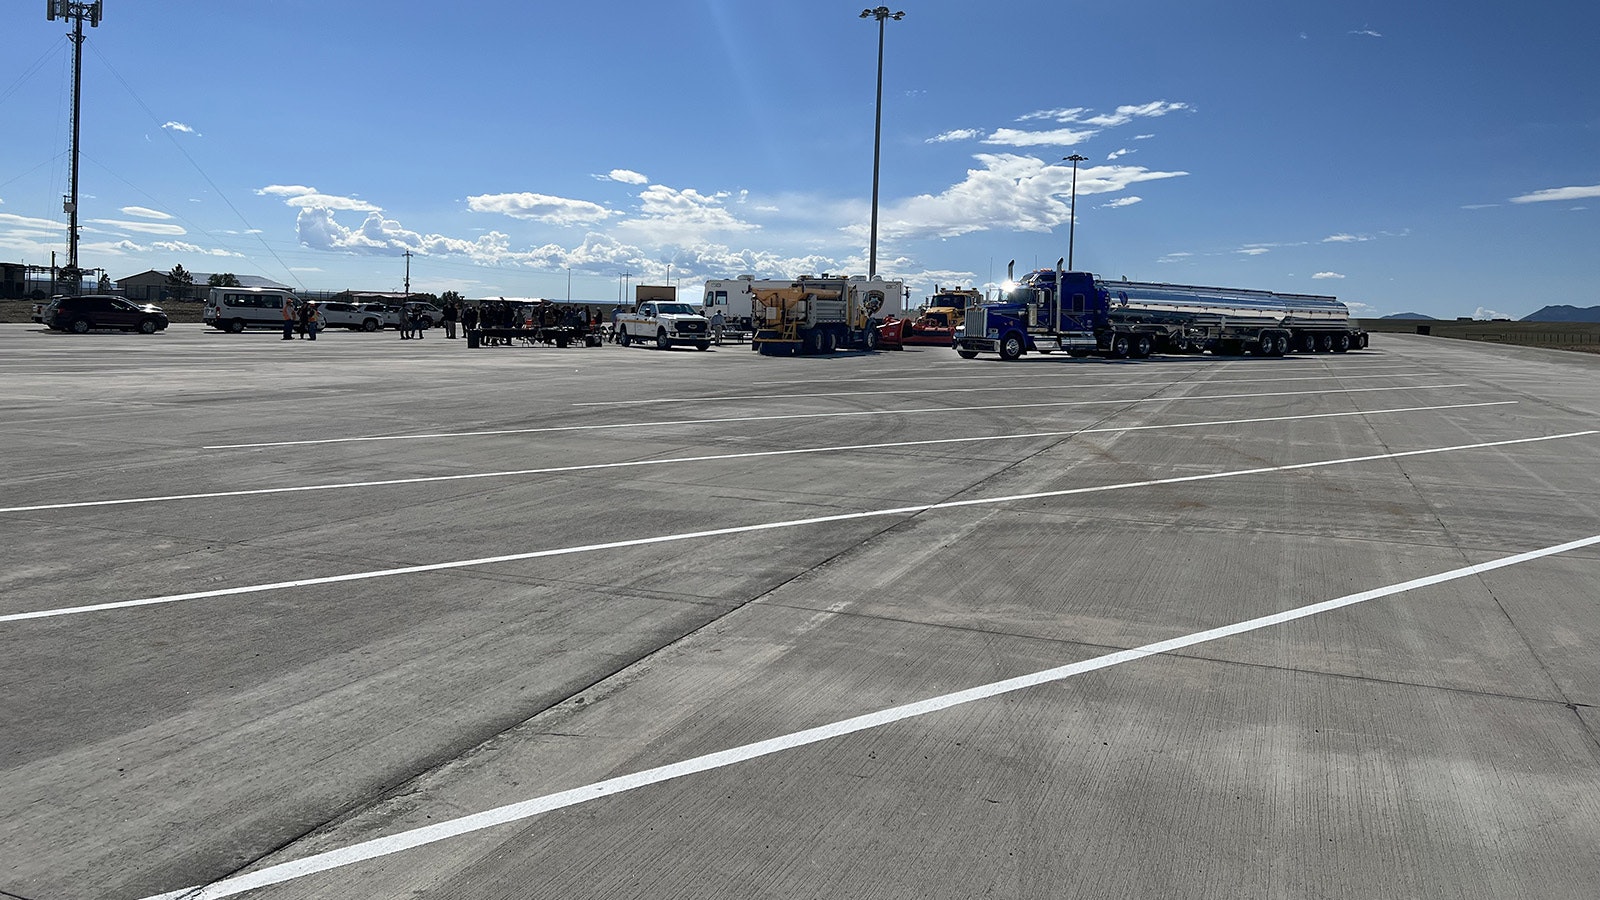 A crowed gathered early Wednesday to celebrate the official opening of a massive new semi-truck parking lot at Quealy Dome along Interstate 80. The lot will give truckers a safe place to wait out winter storms.